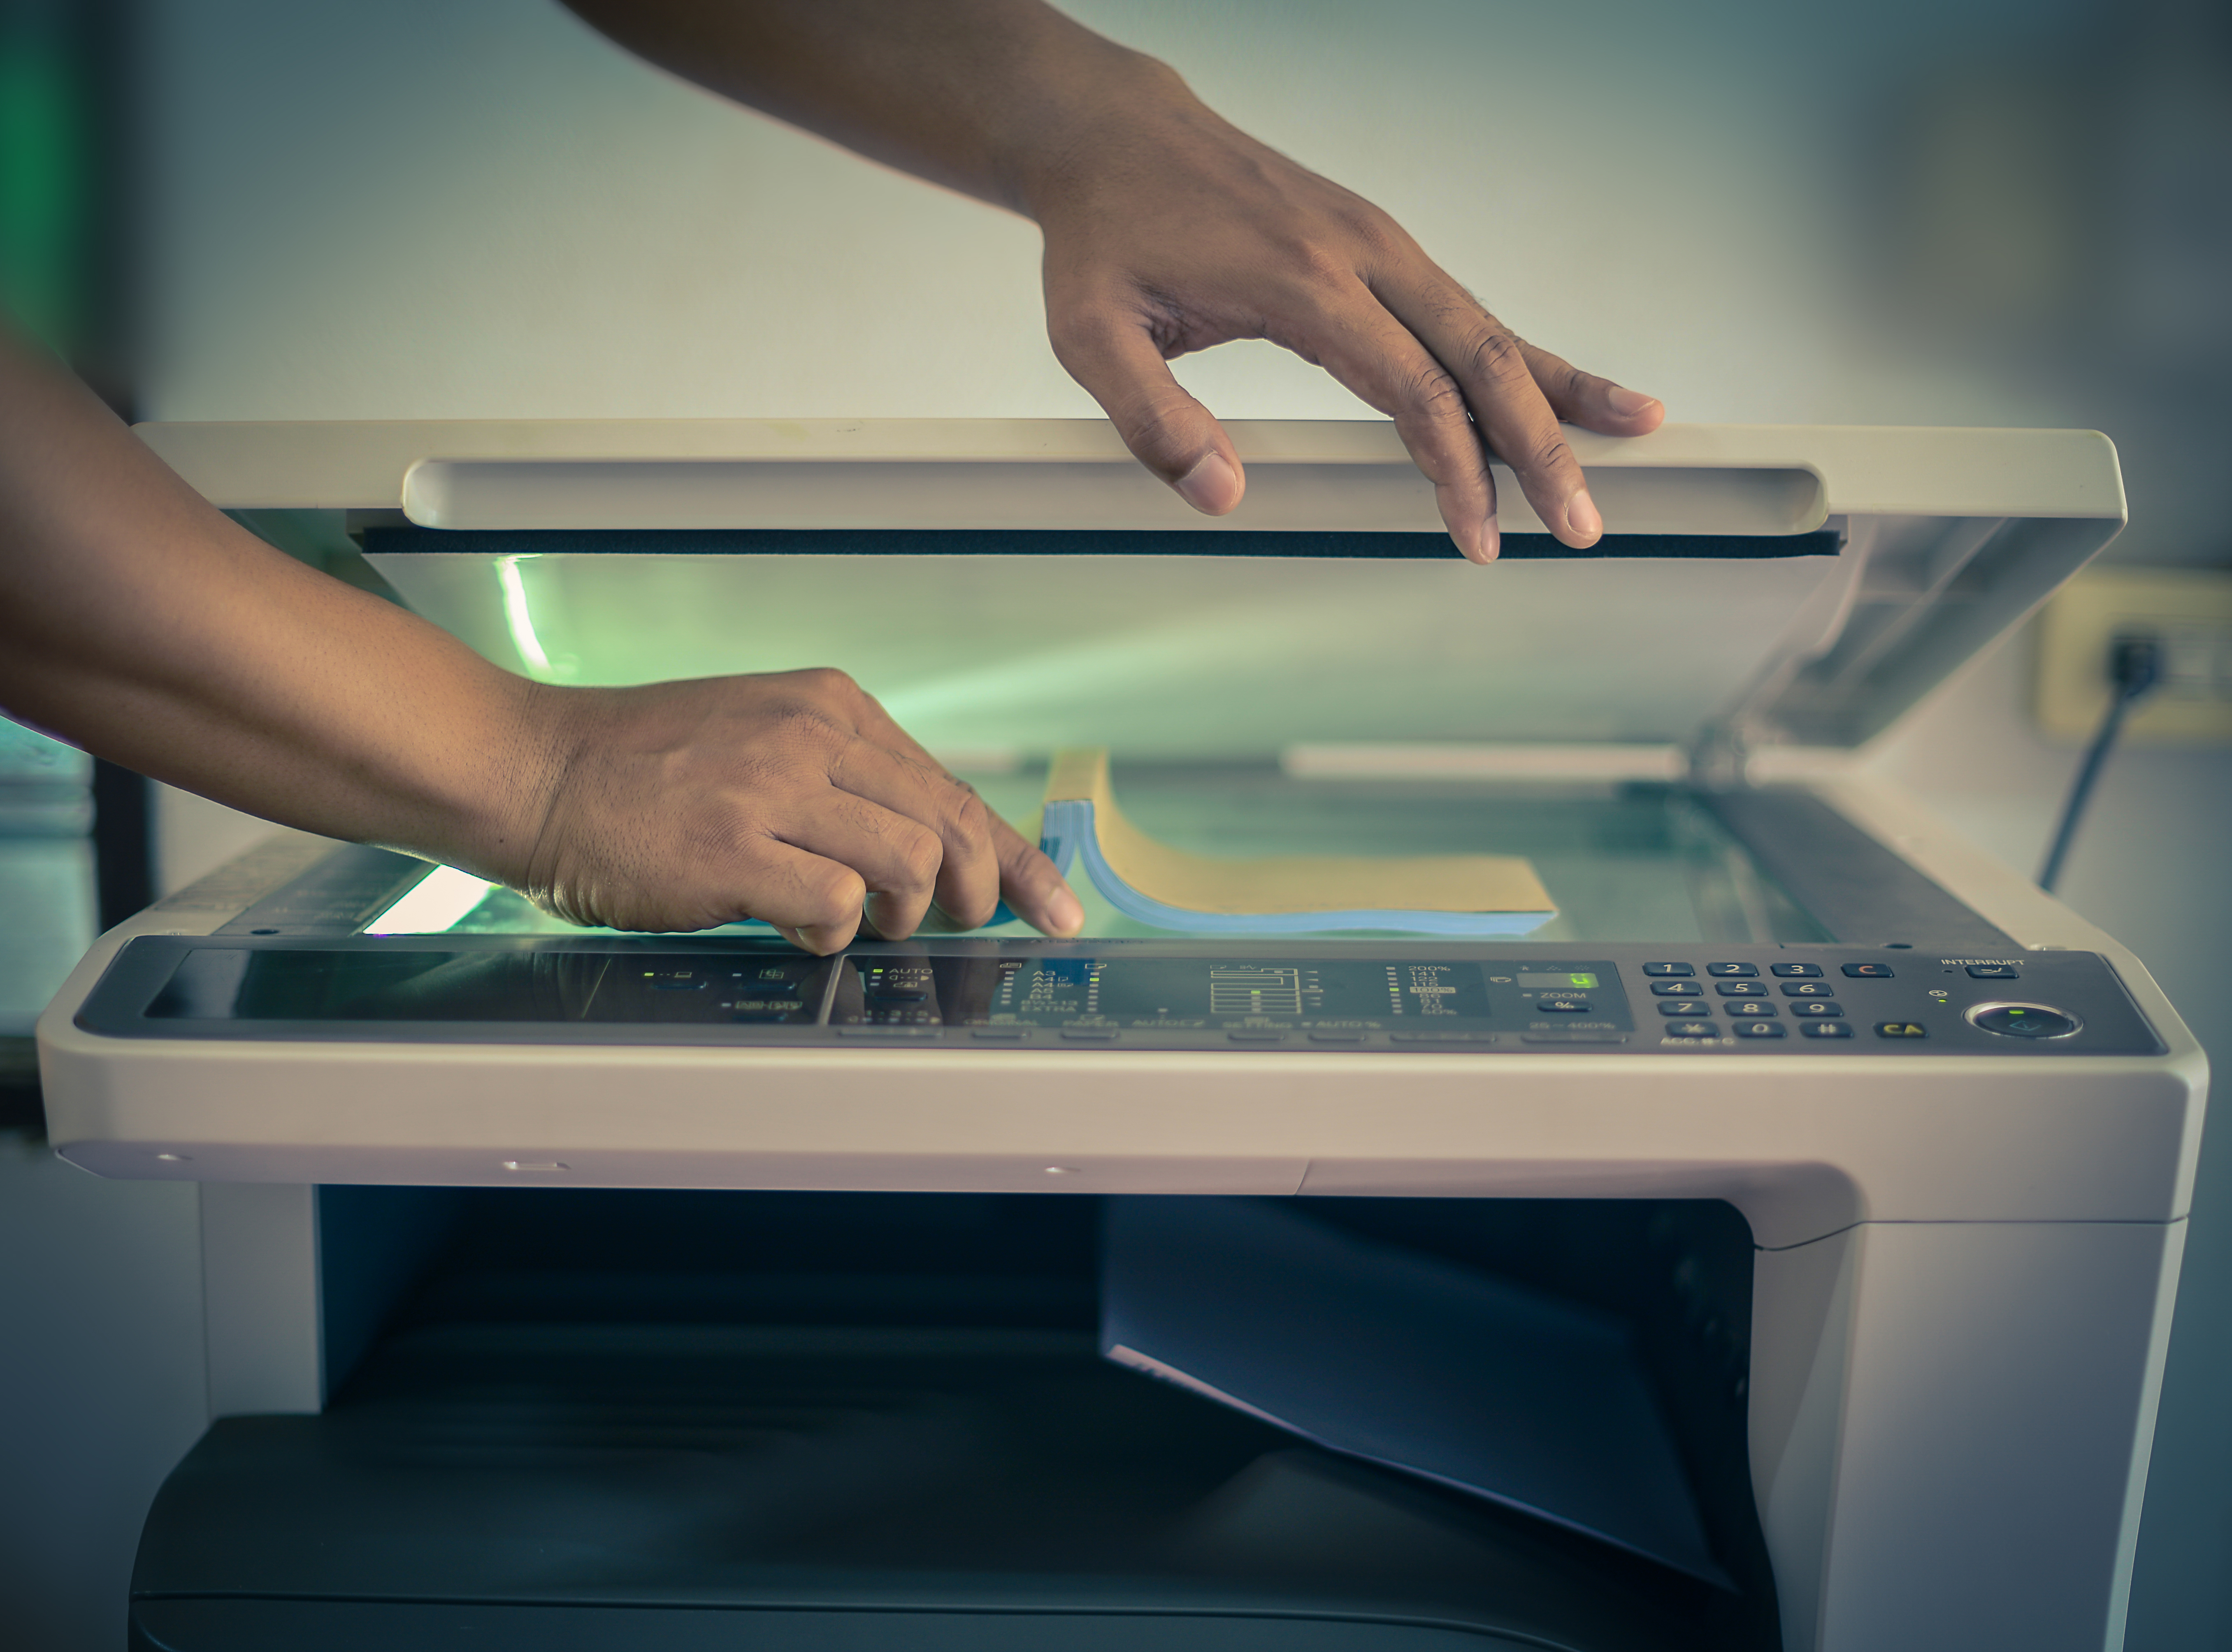 Hands placing paper on glass tray inside photocopier